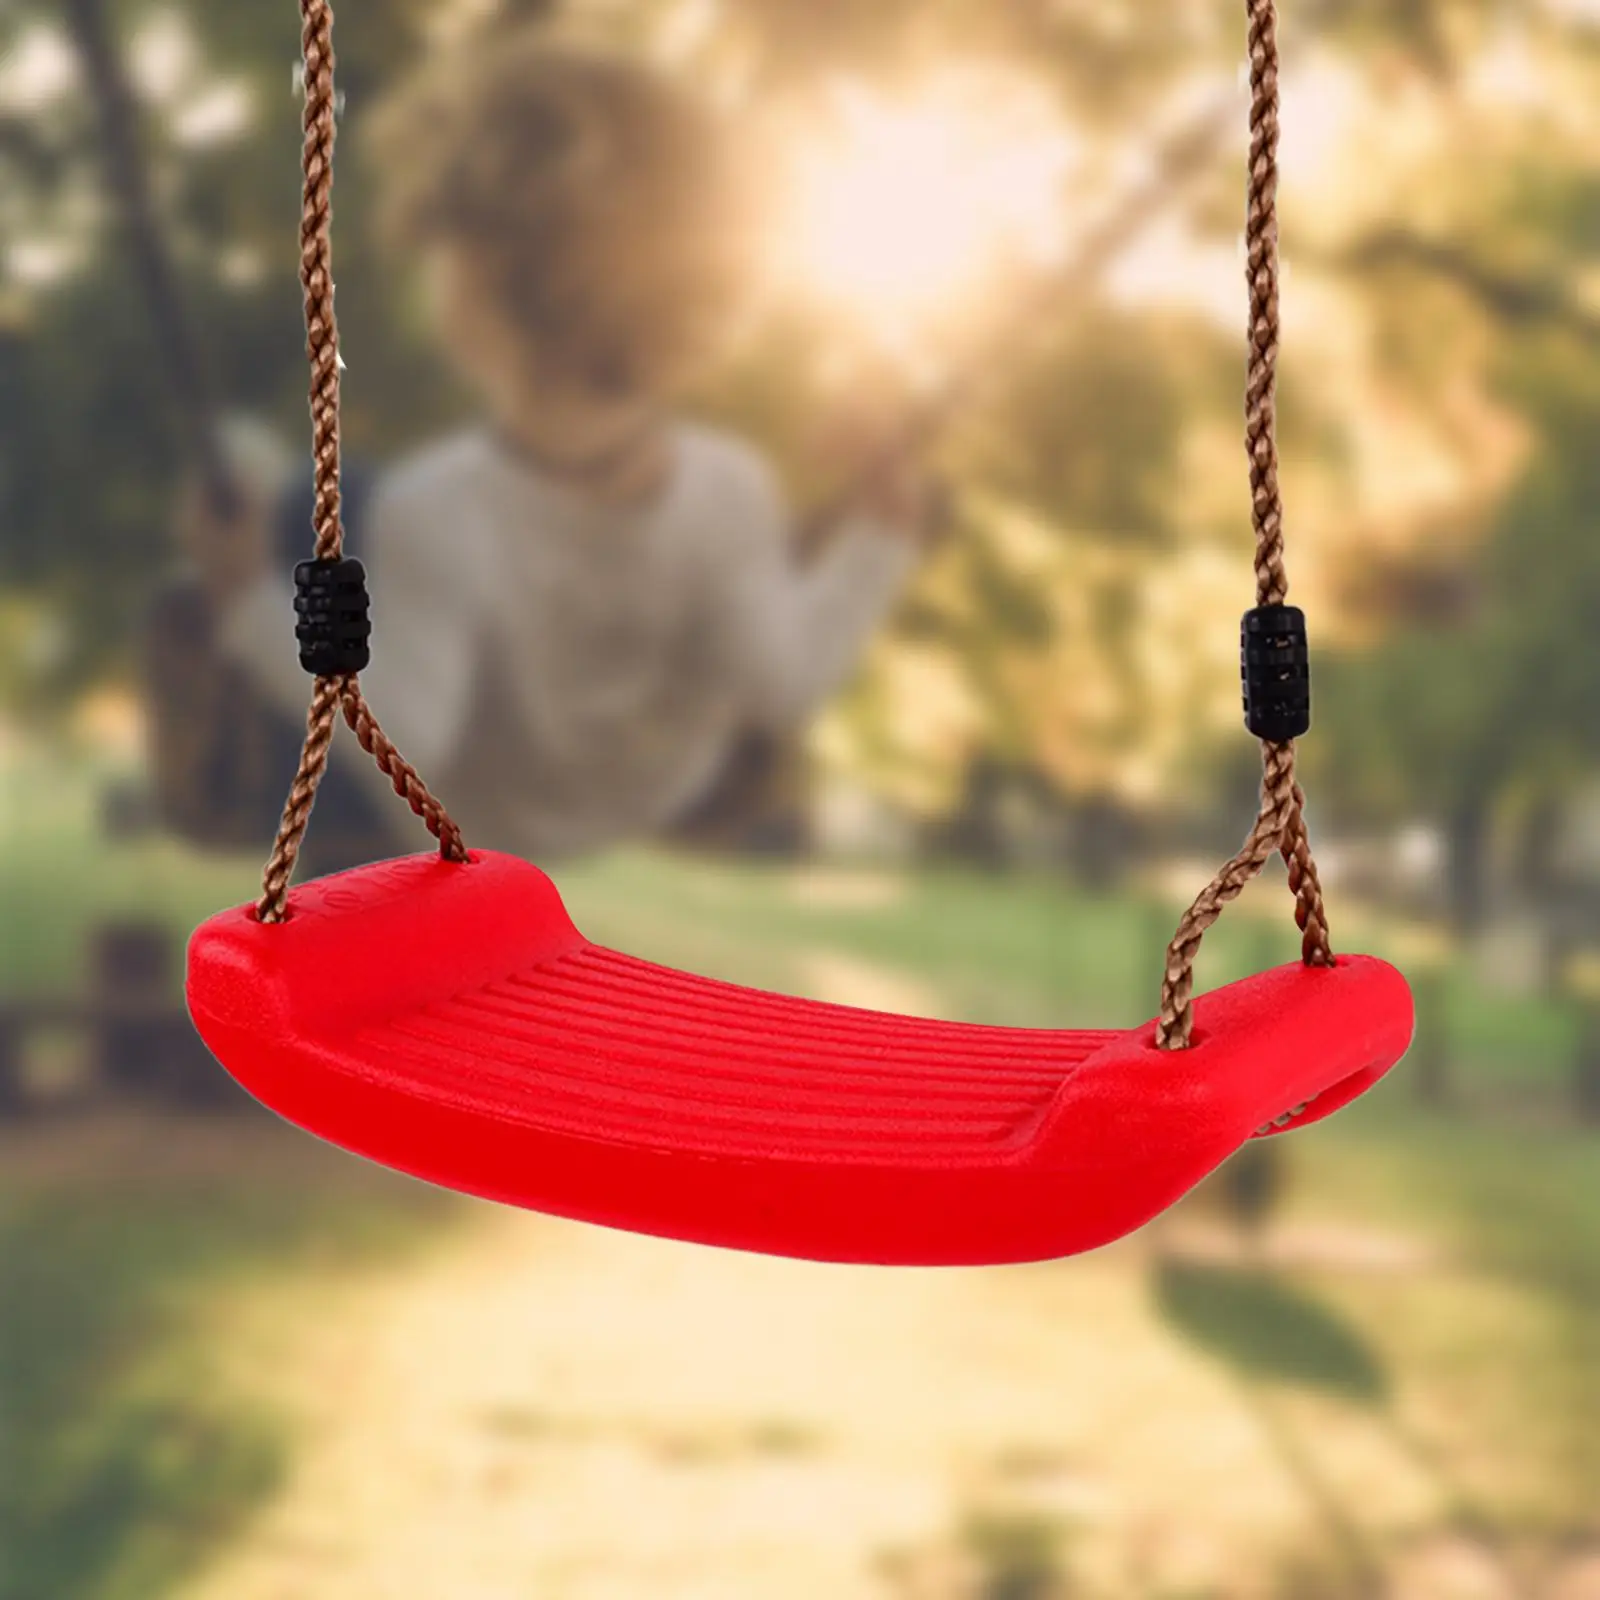 Indoor Outdoor Toys Curved Board Swing Chair Flying Toy Garden Swing Kids Hanging Seat Toys with Height Adjustable Ropes